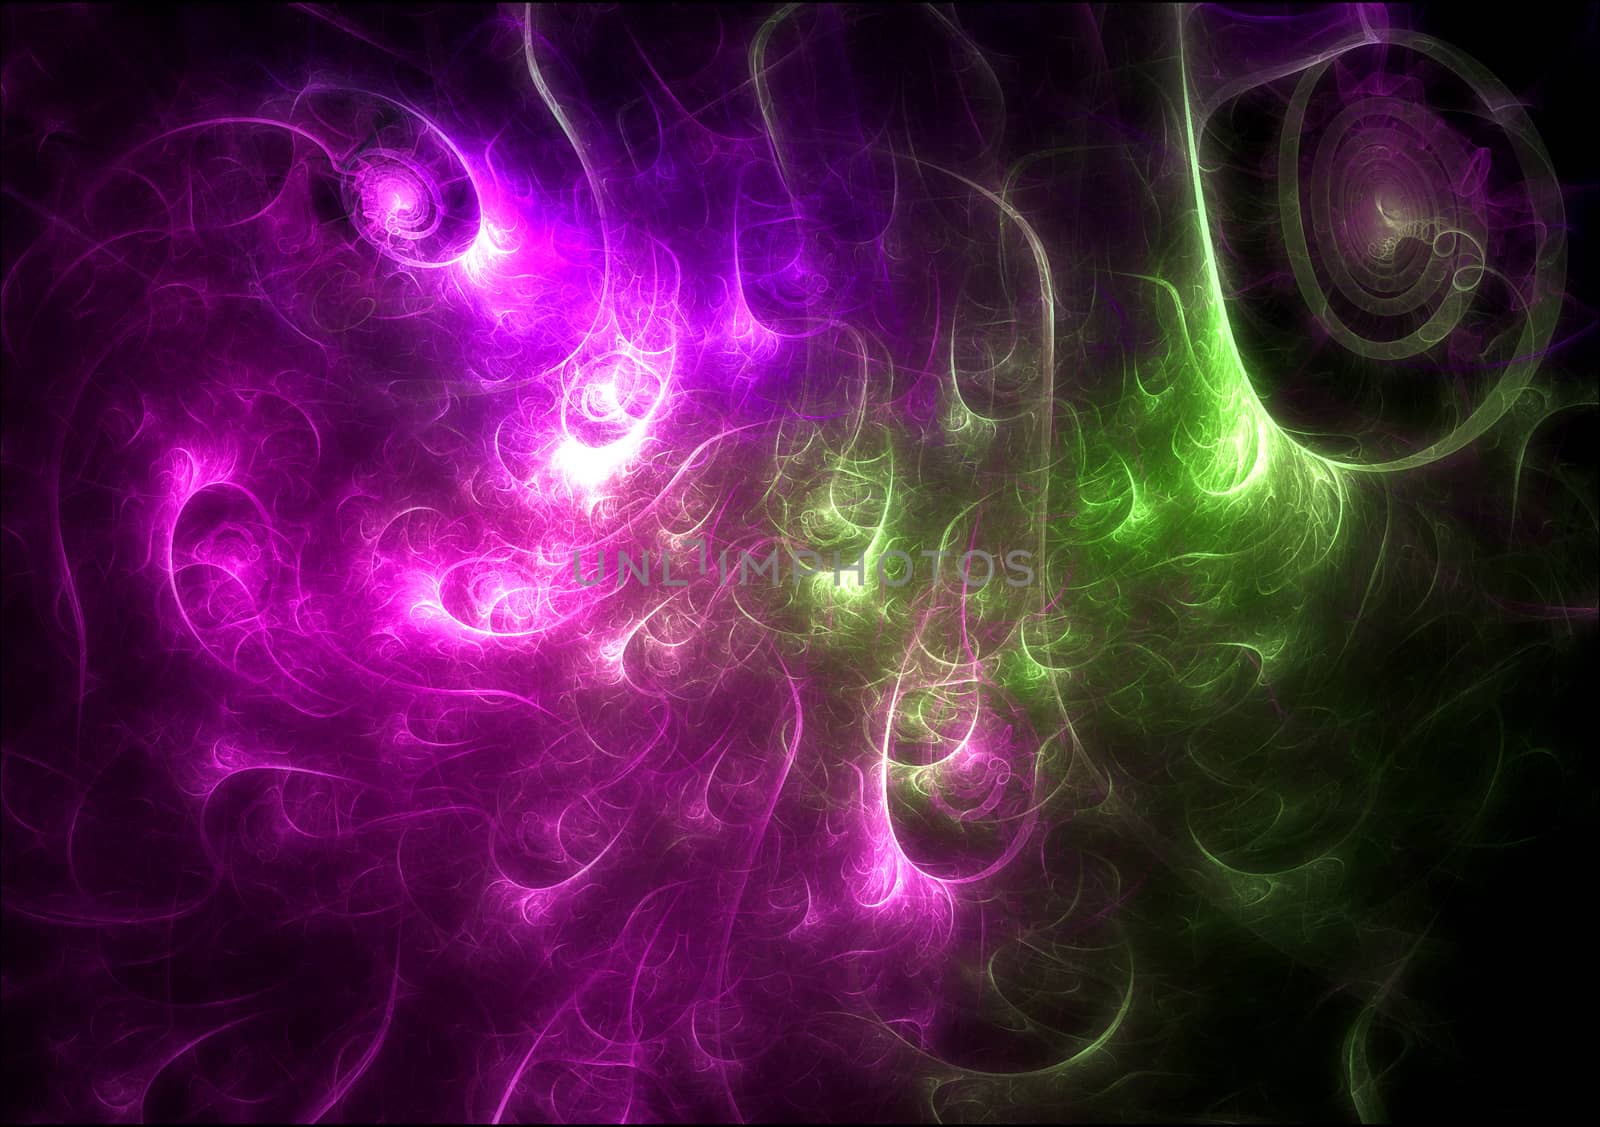 Chaotic swirling currents of air inside an alien weather system.